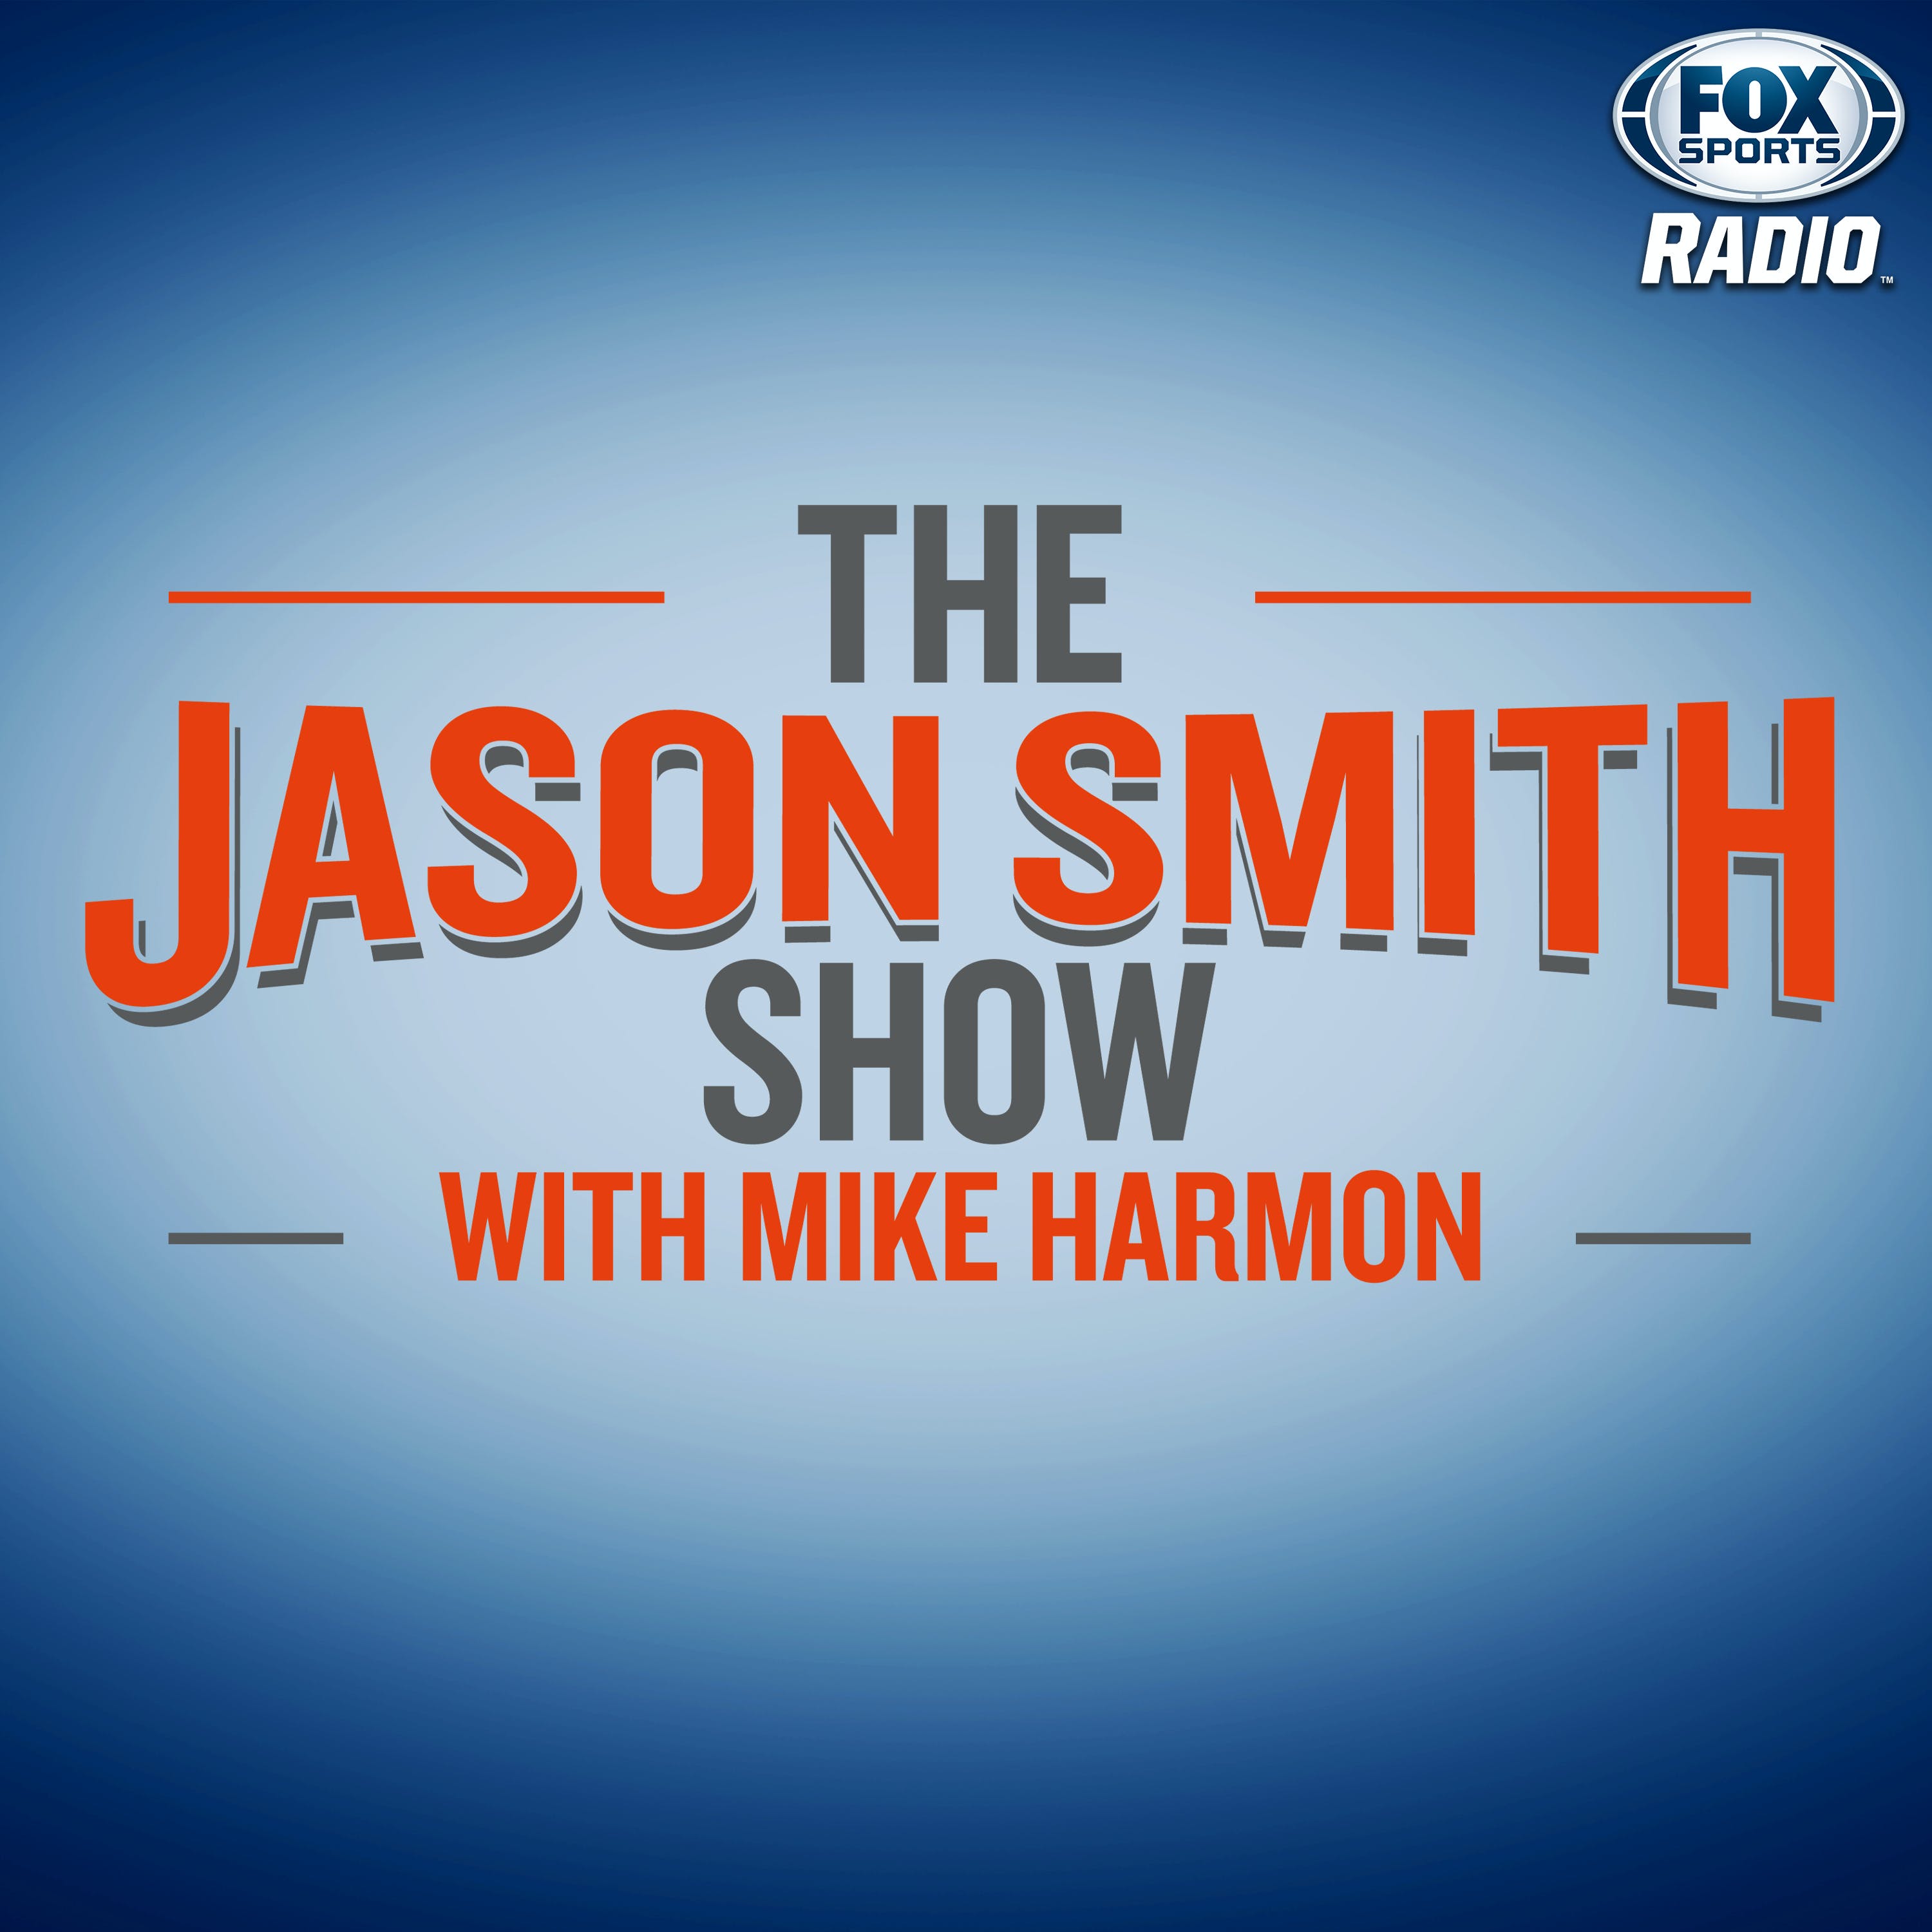 09/03/2021 - Best of The Jason Smith Show with Mike Harmon